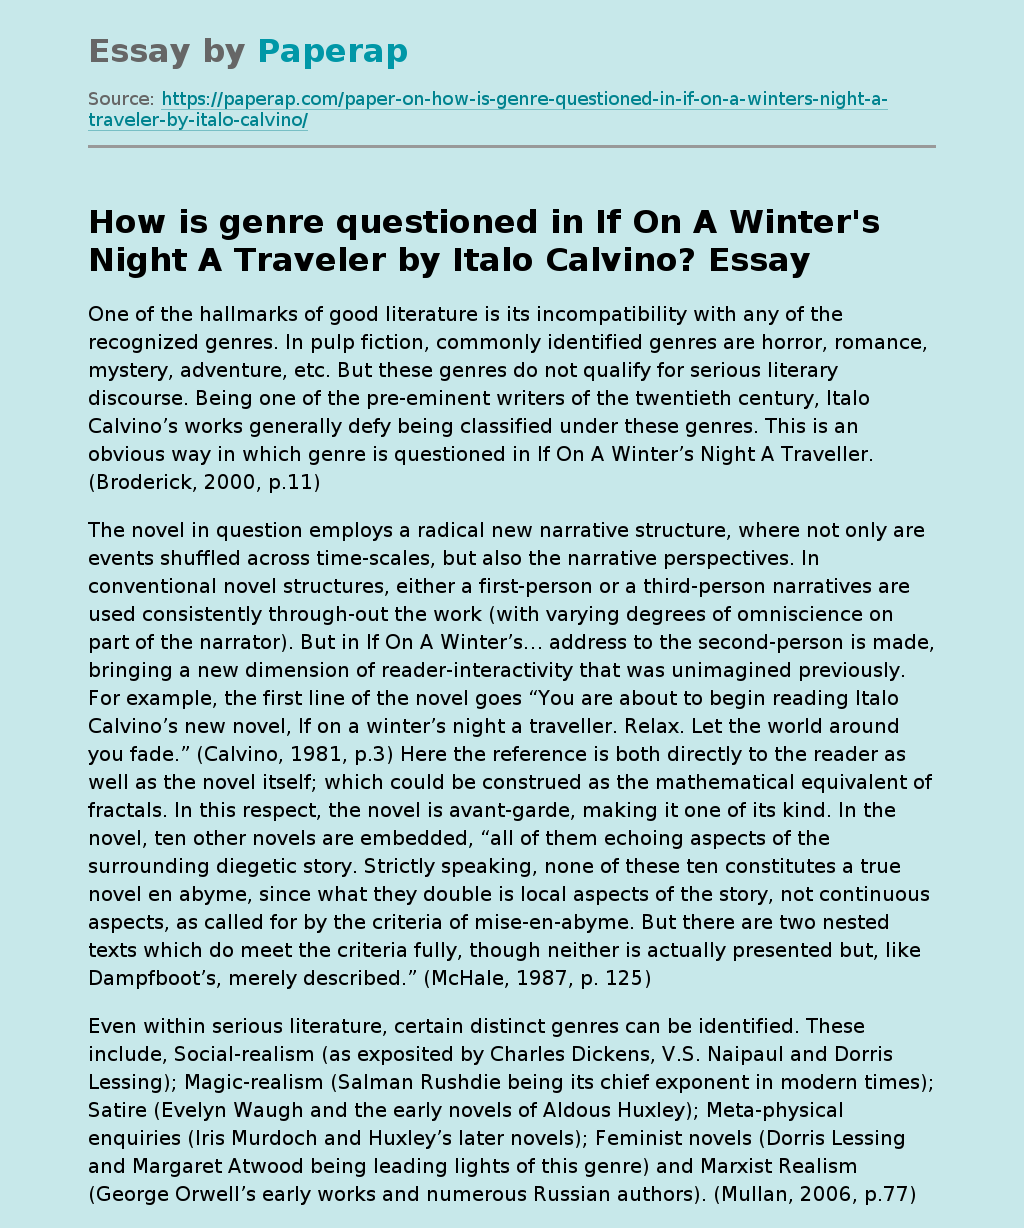 How is genre questioned in If On A Winter's Night A Traveler by Italo Calvino?